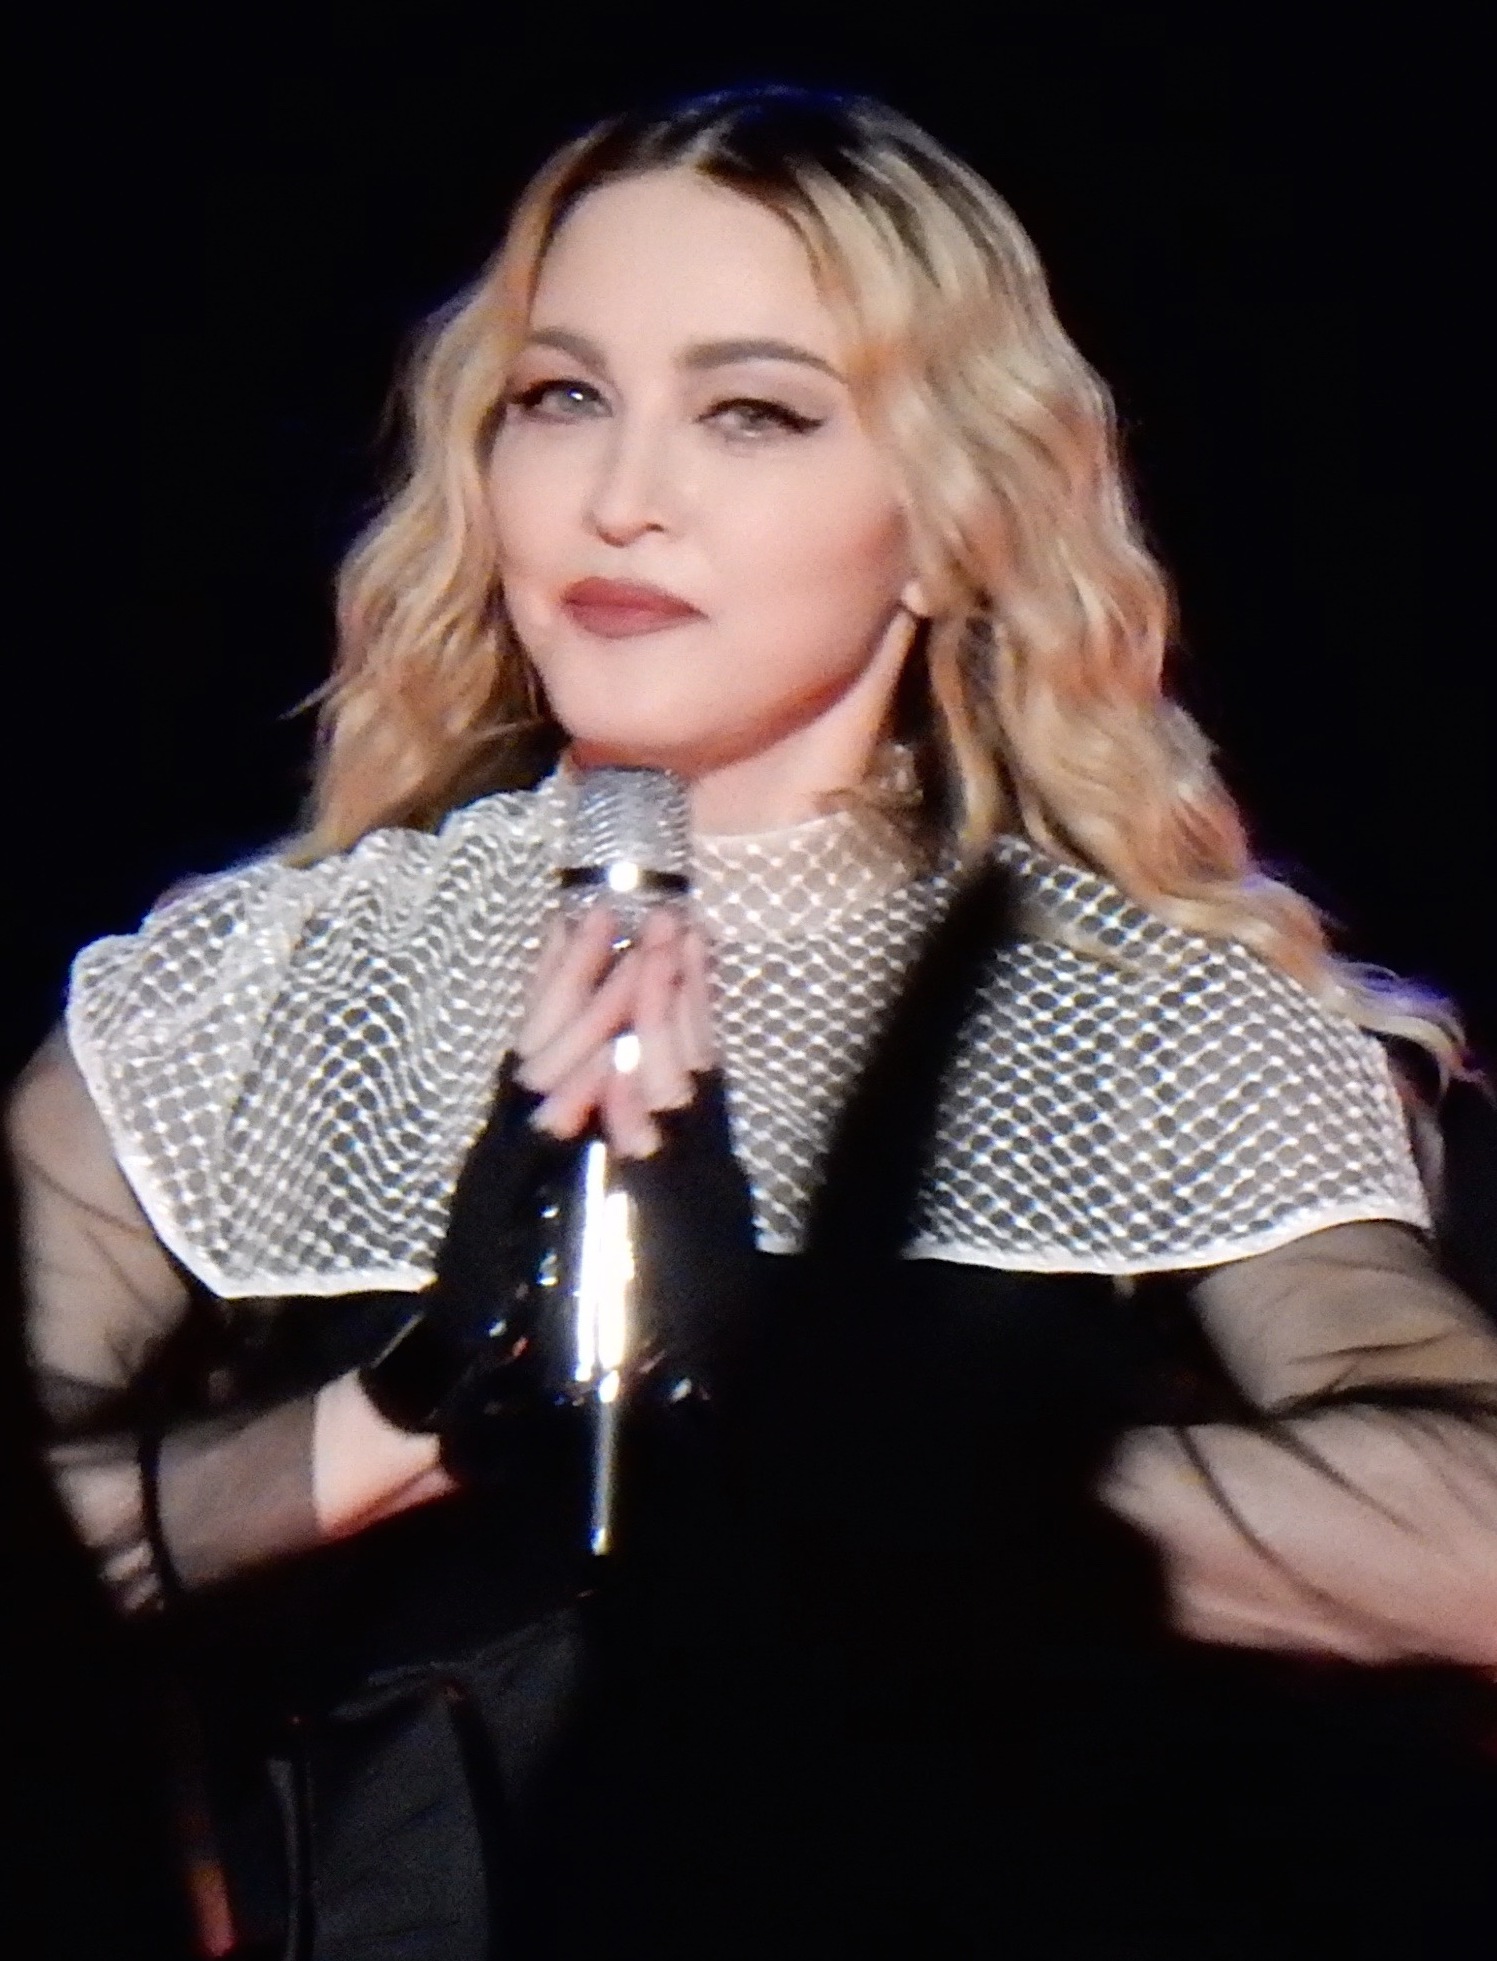 Stream Material Girl (RAY ISAAC Remix) - Madonna by